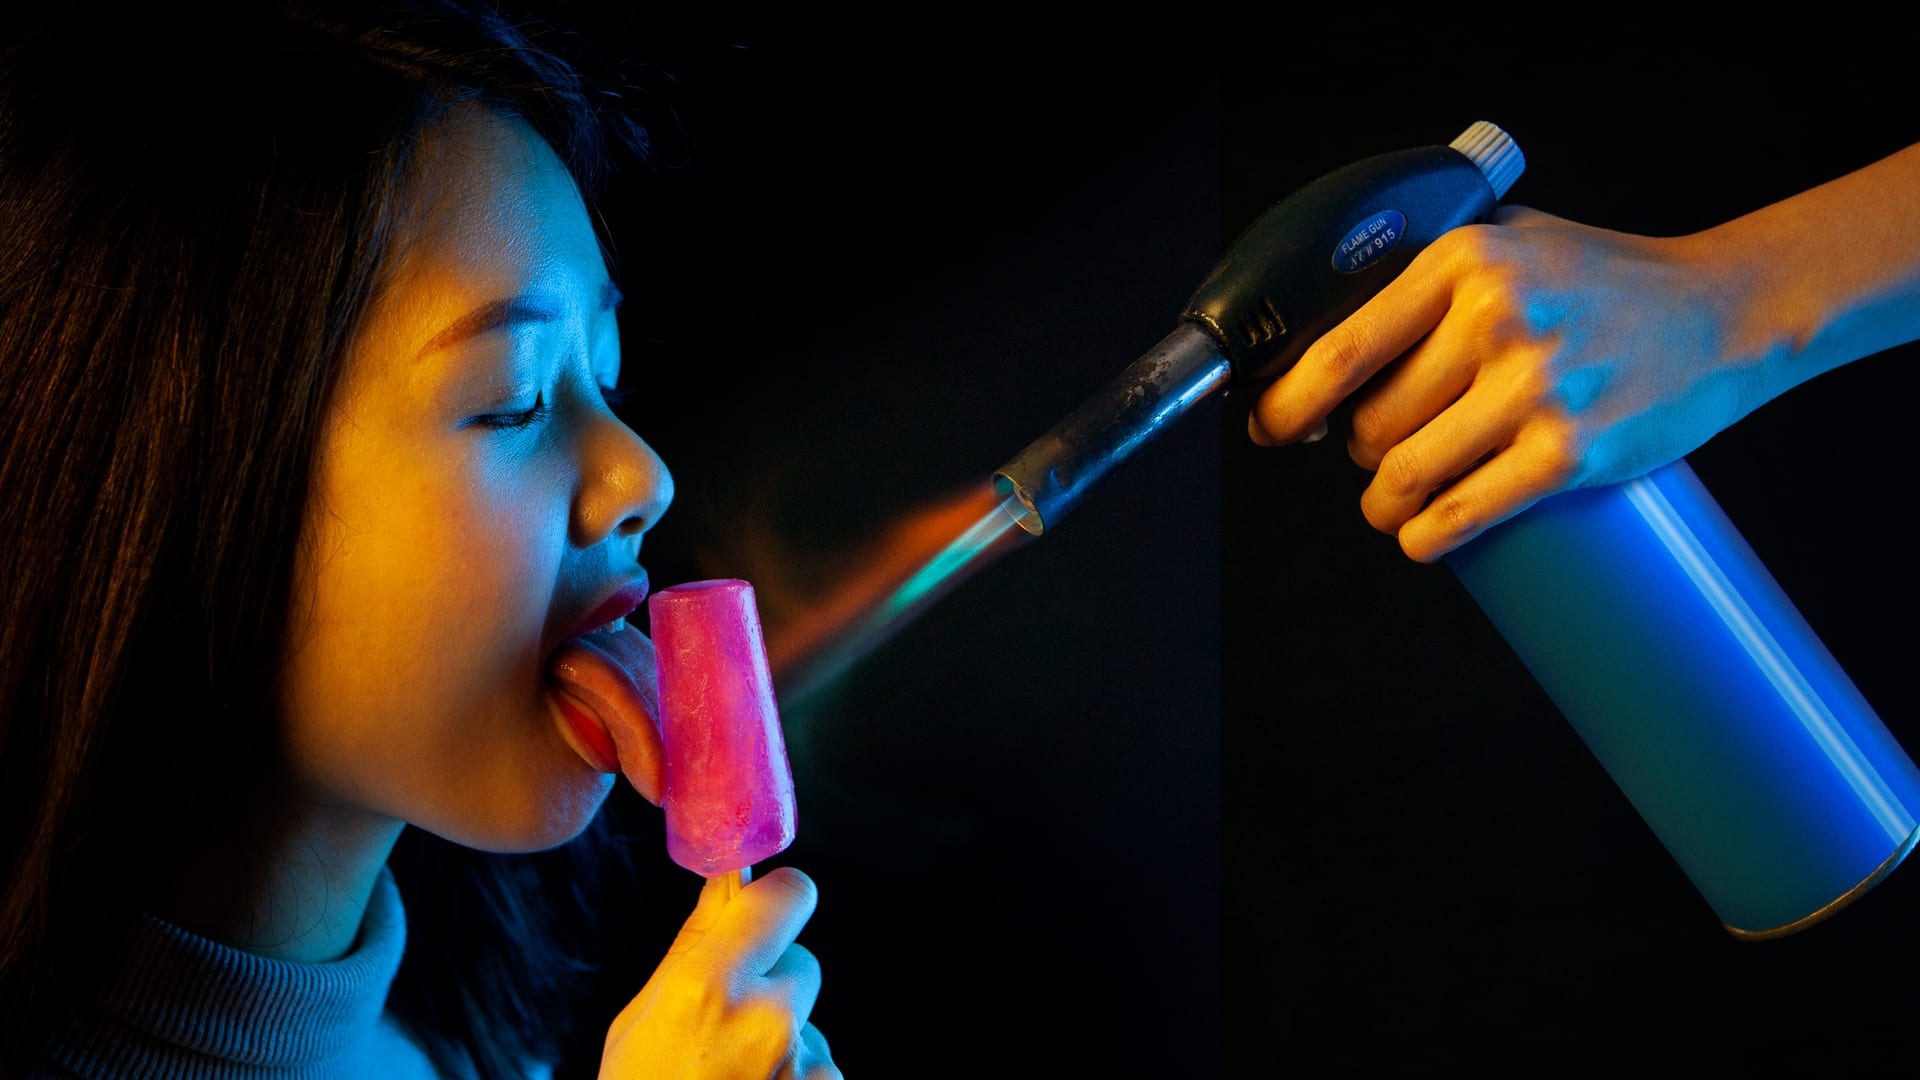 Behold! The first popsicle that won’t melt